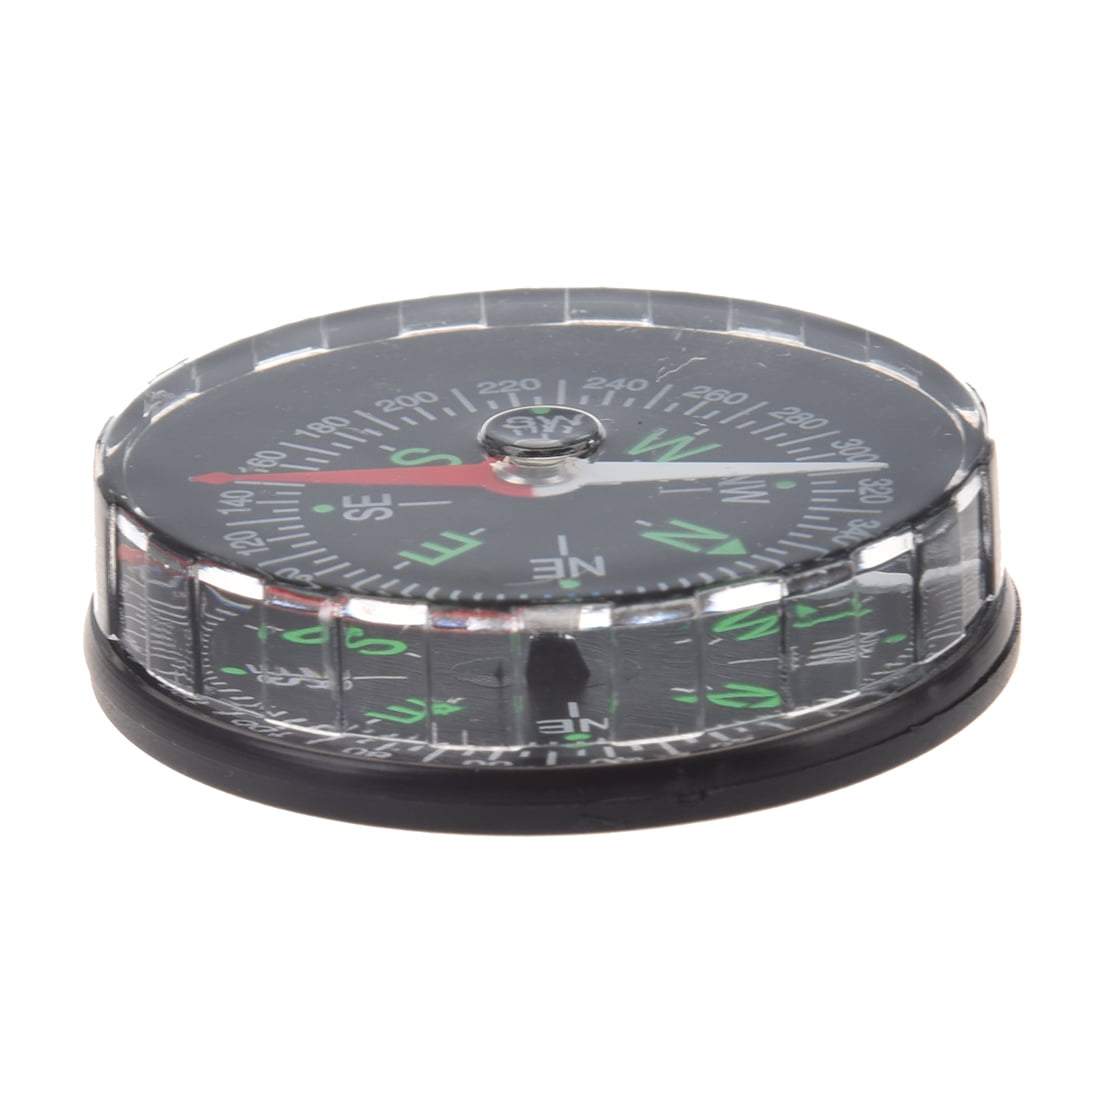 Black Oil Filled Compass Excellent for hiking, camping and outdoor A6F1 10X 